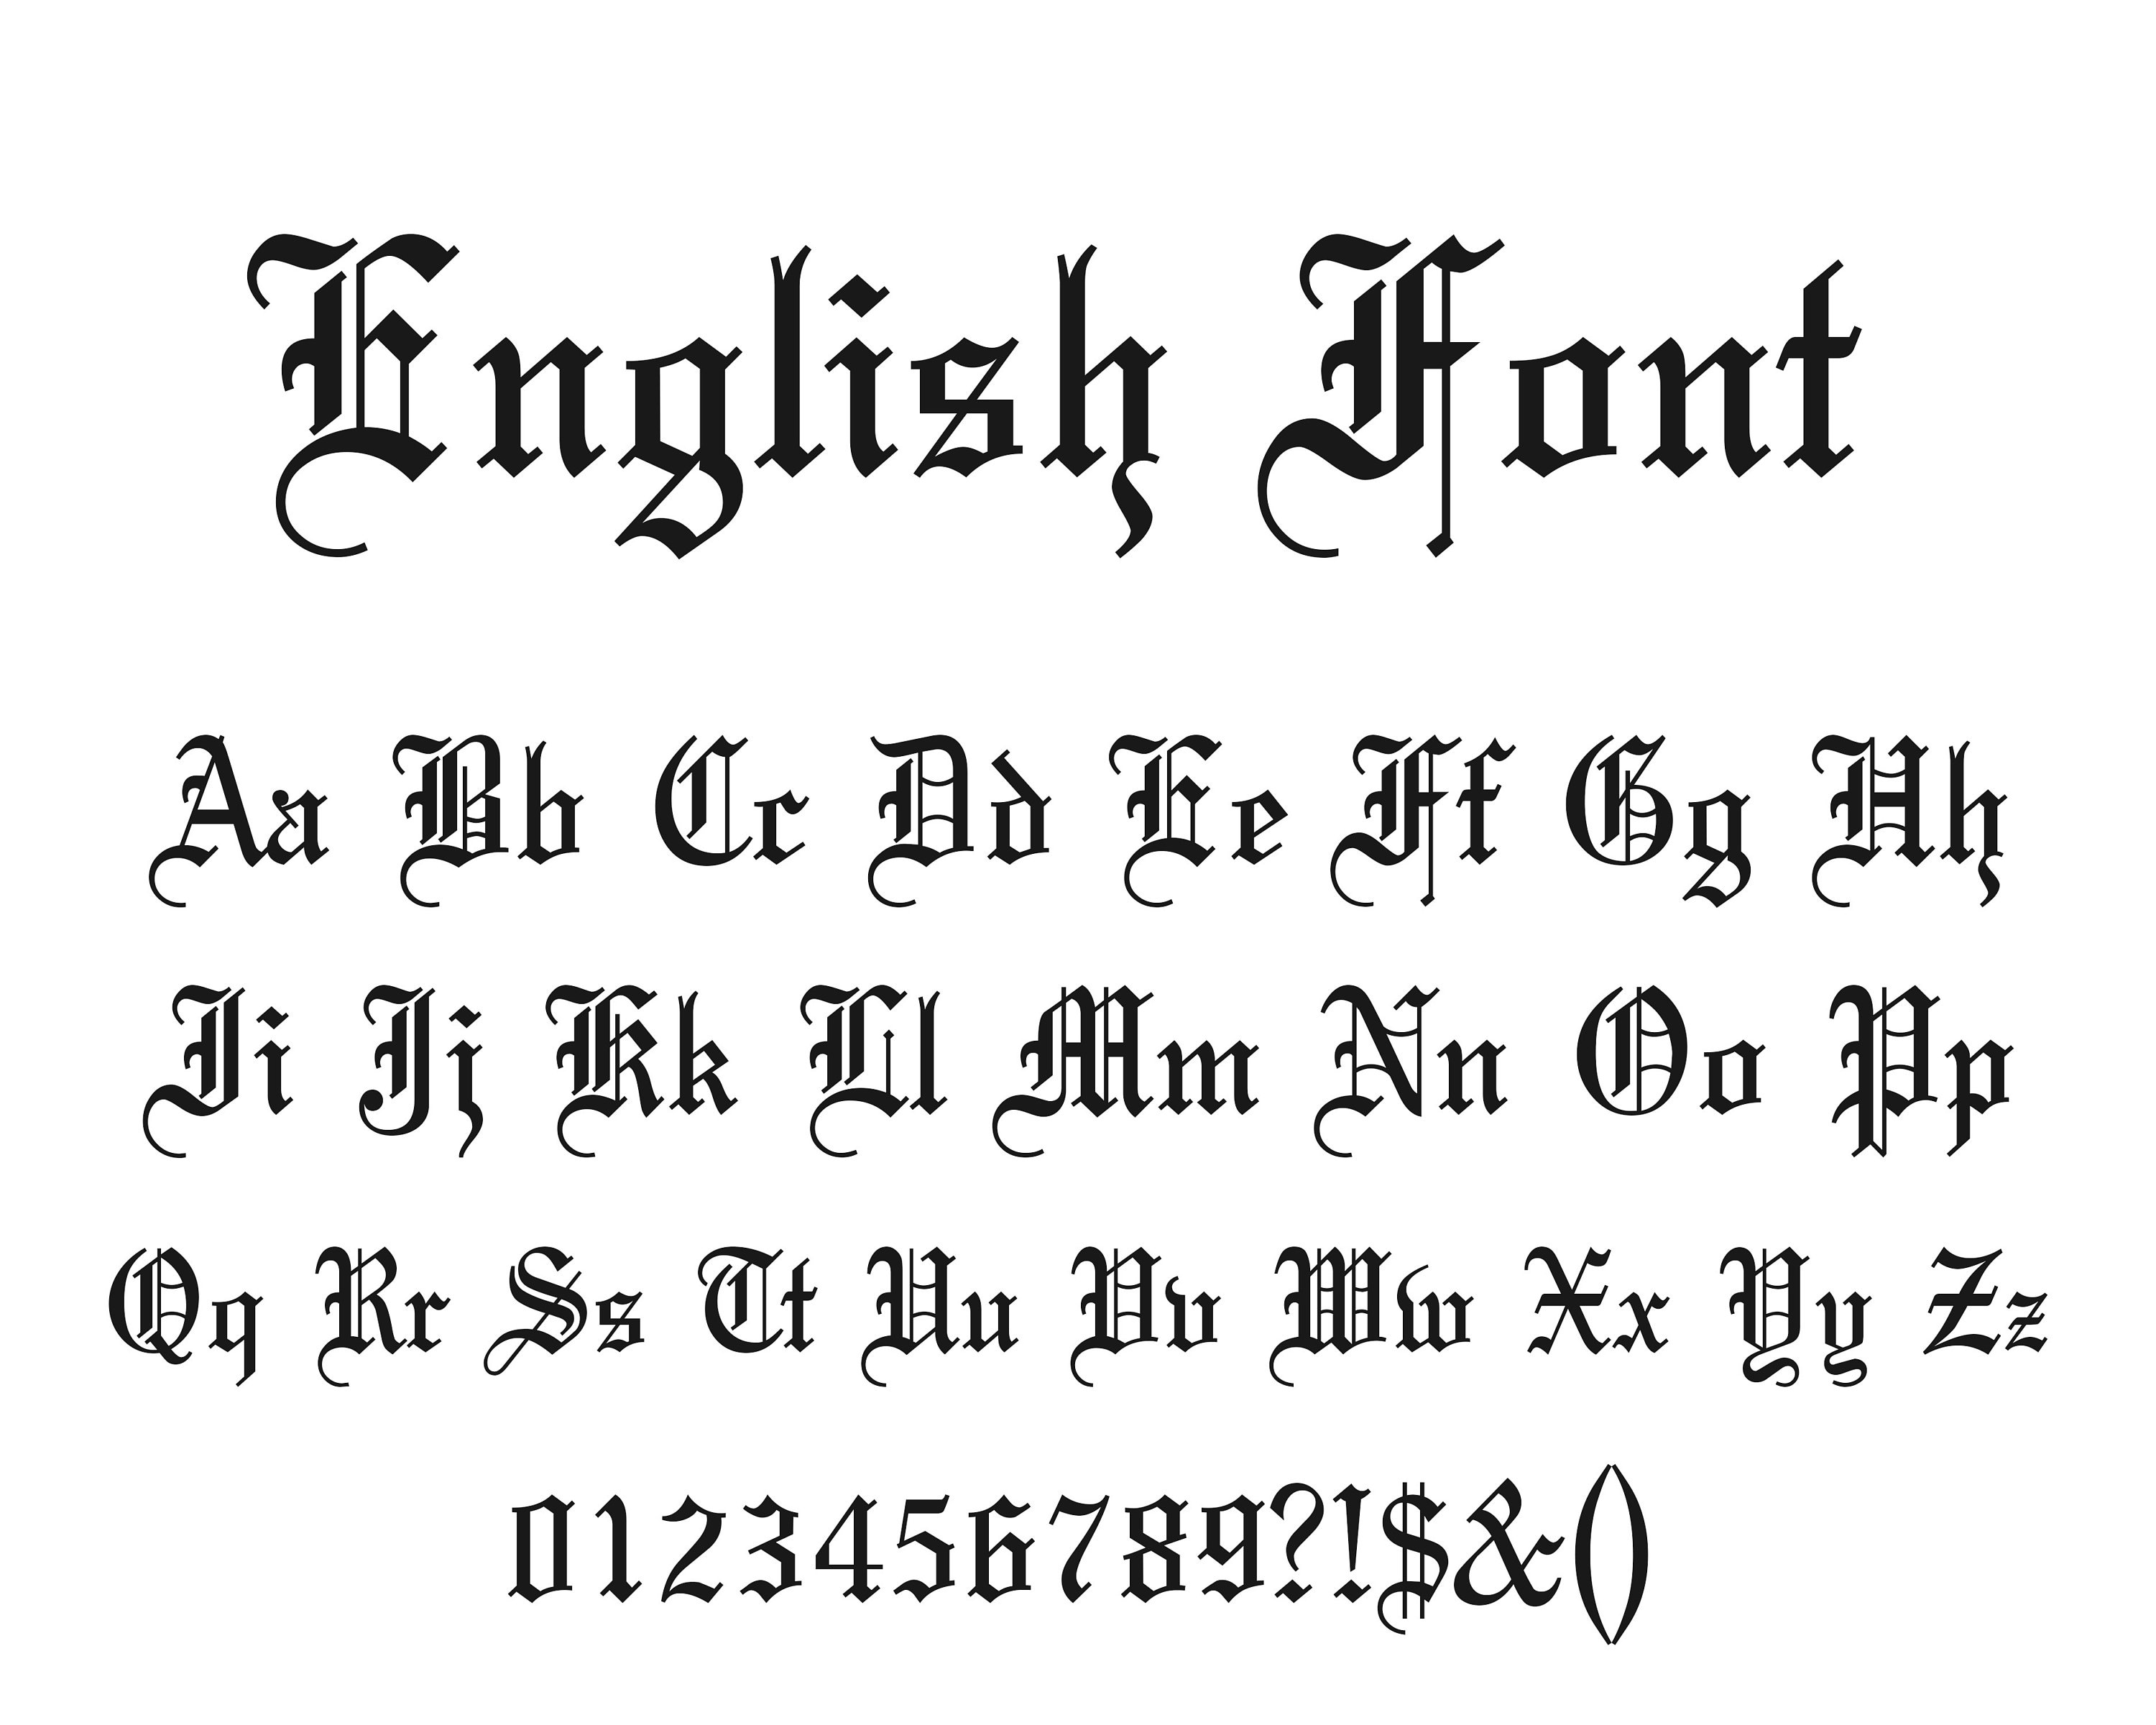 File:Old English typeface.svg - Wikimedia Commons